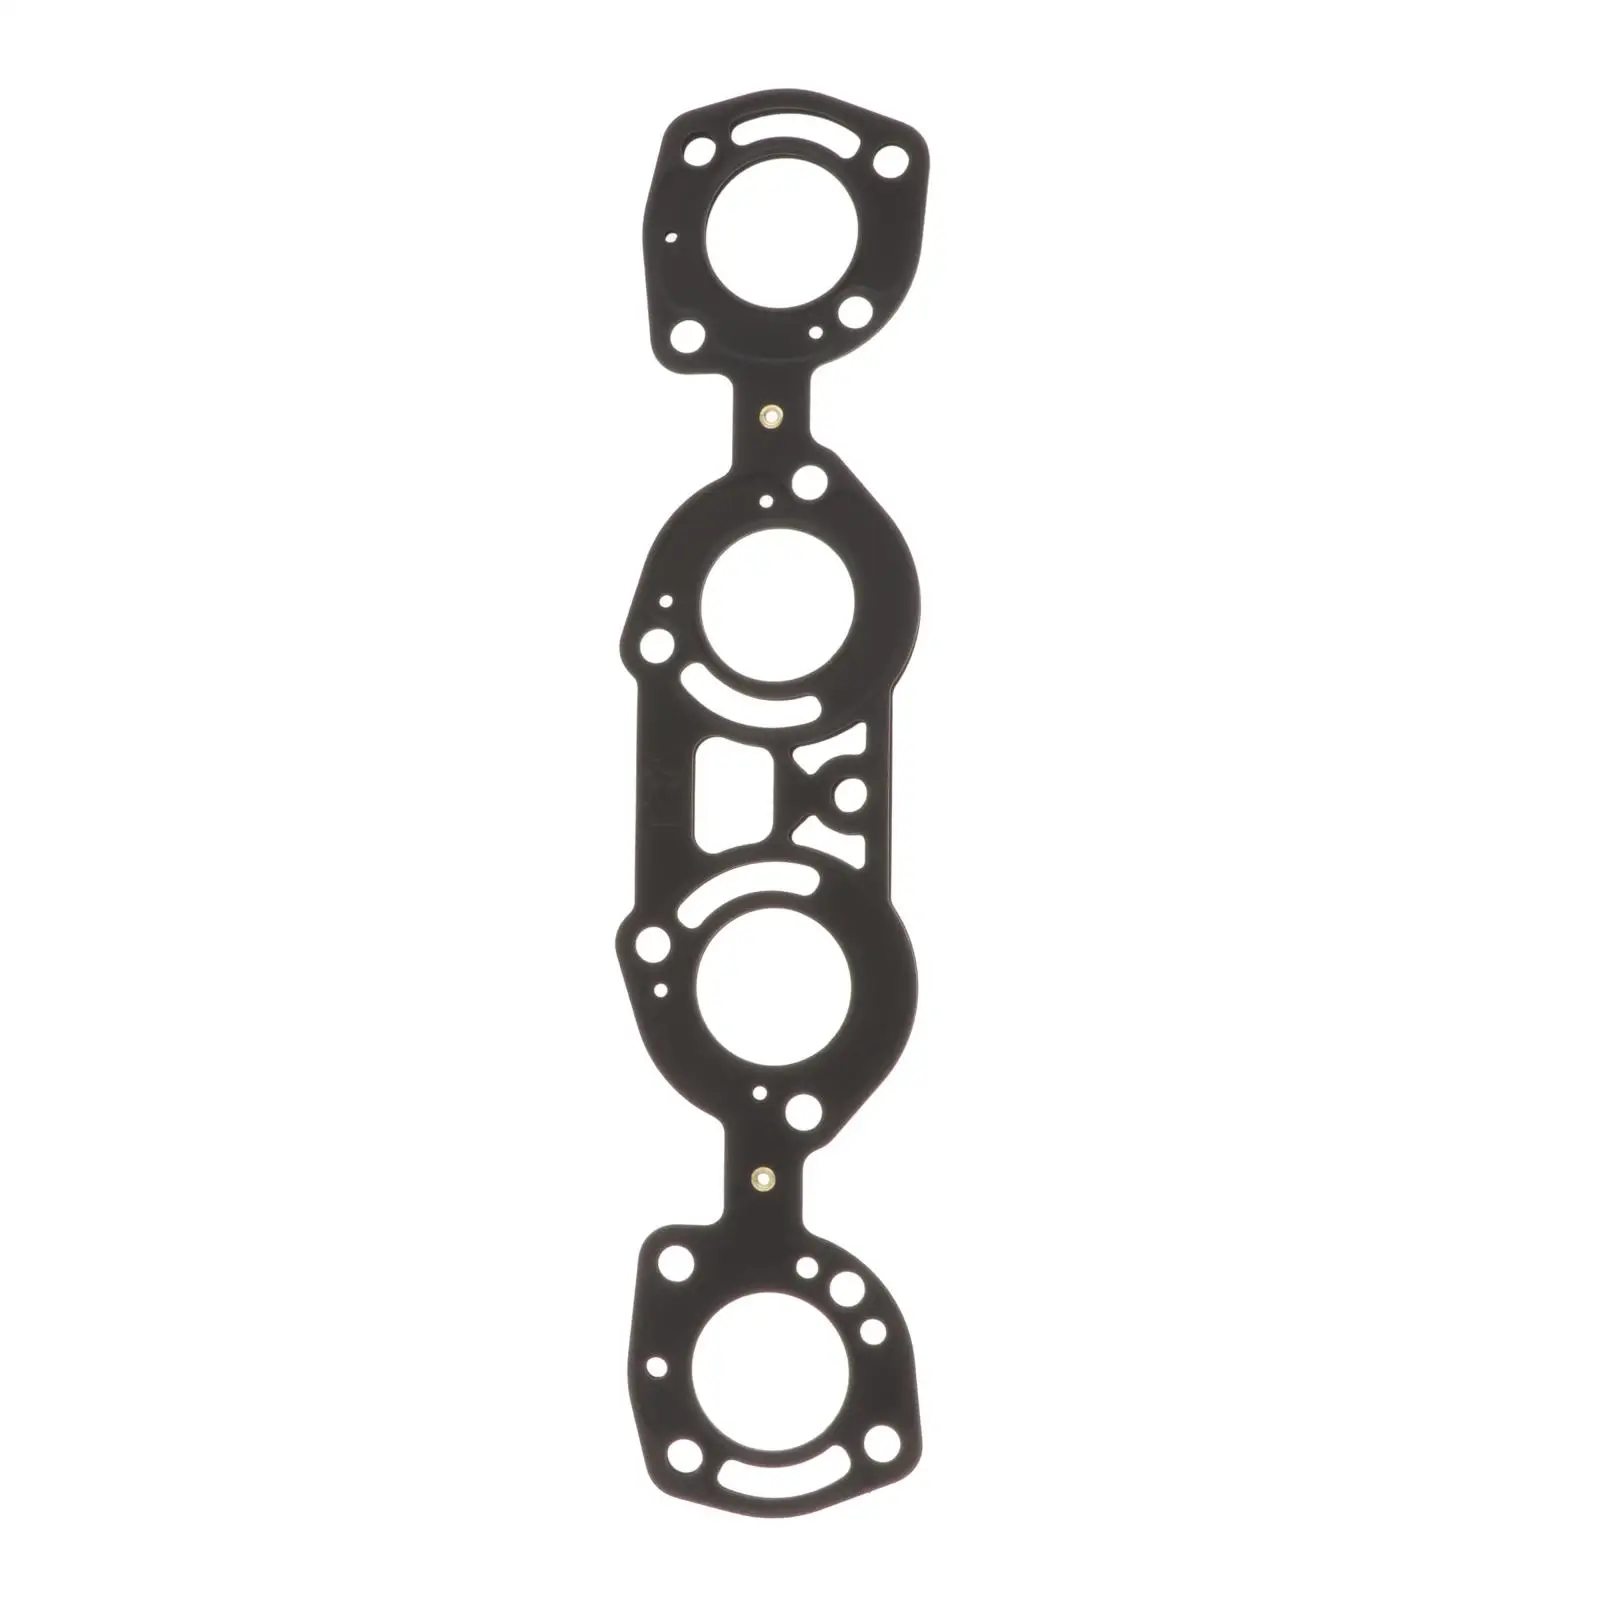 Exhaust Manifold Gasket Fit for Yamaha FZR1800 GP1800 6ET-14613-00-00 Replacement Parts Acc